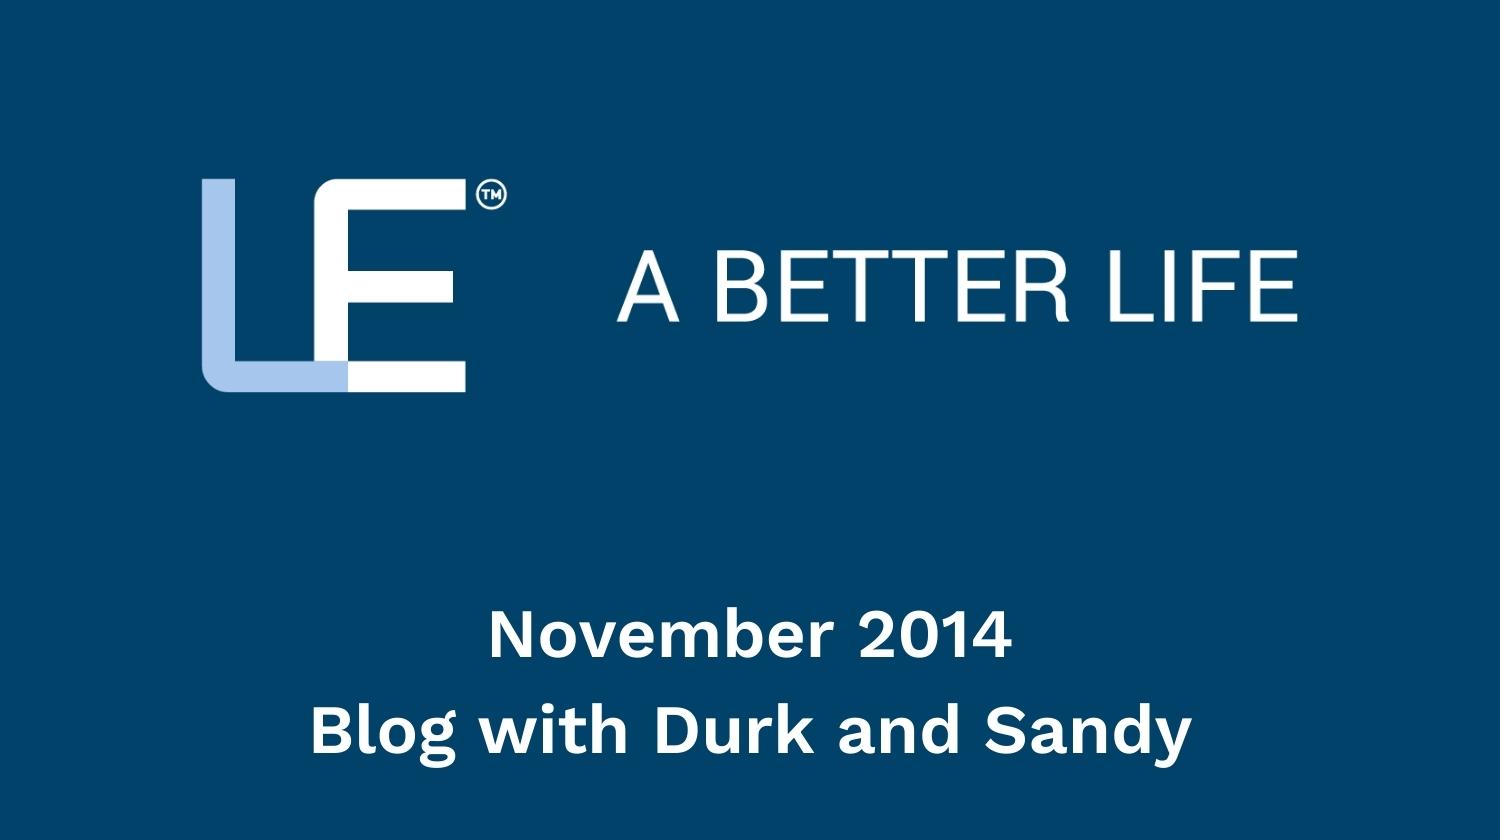 November 2014 Blog with Durk and Sandy